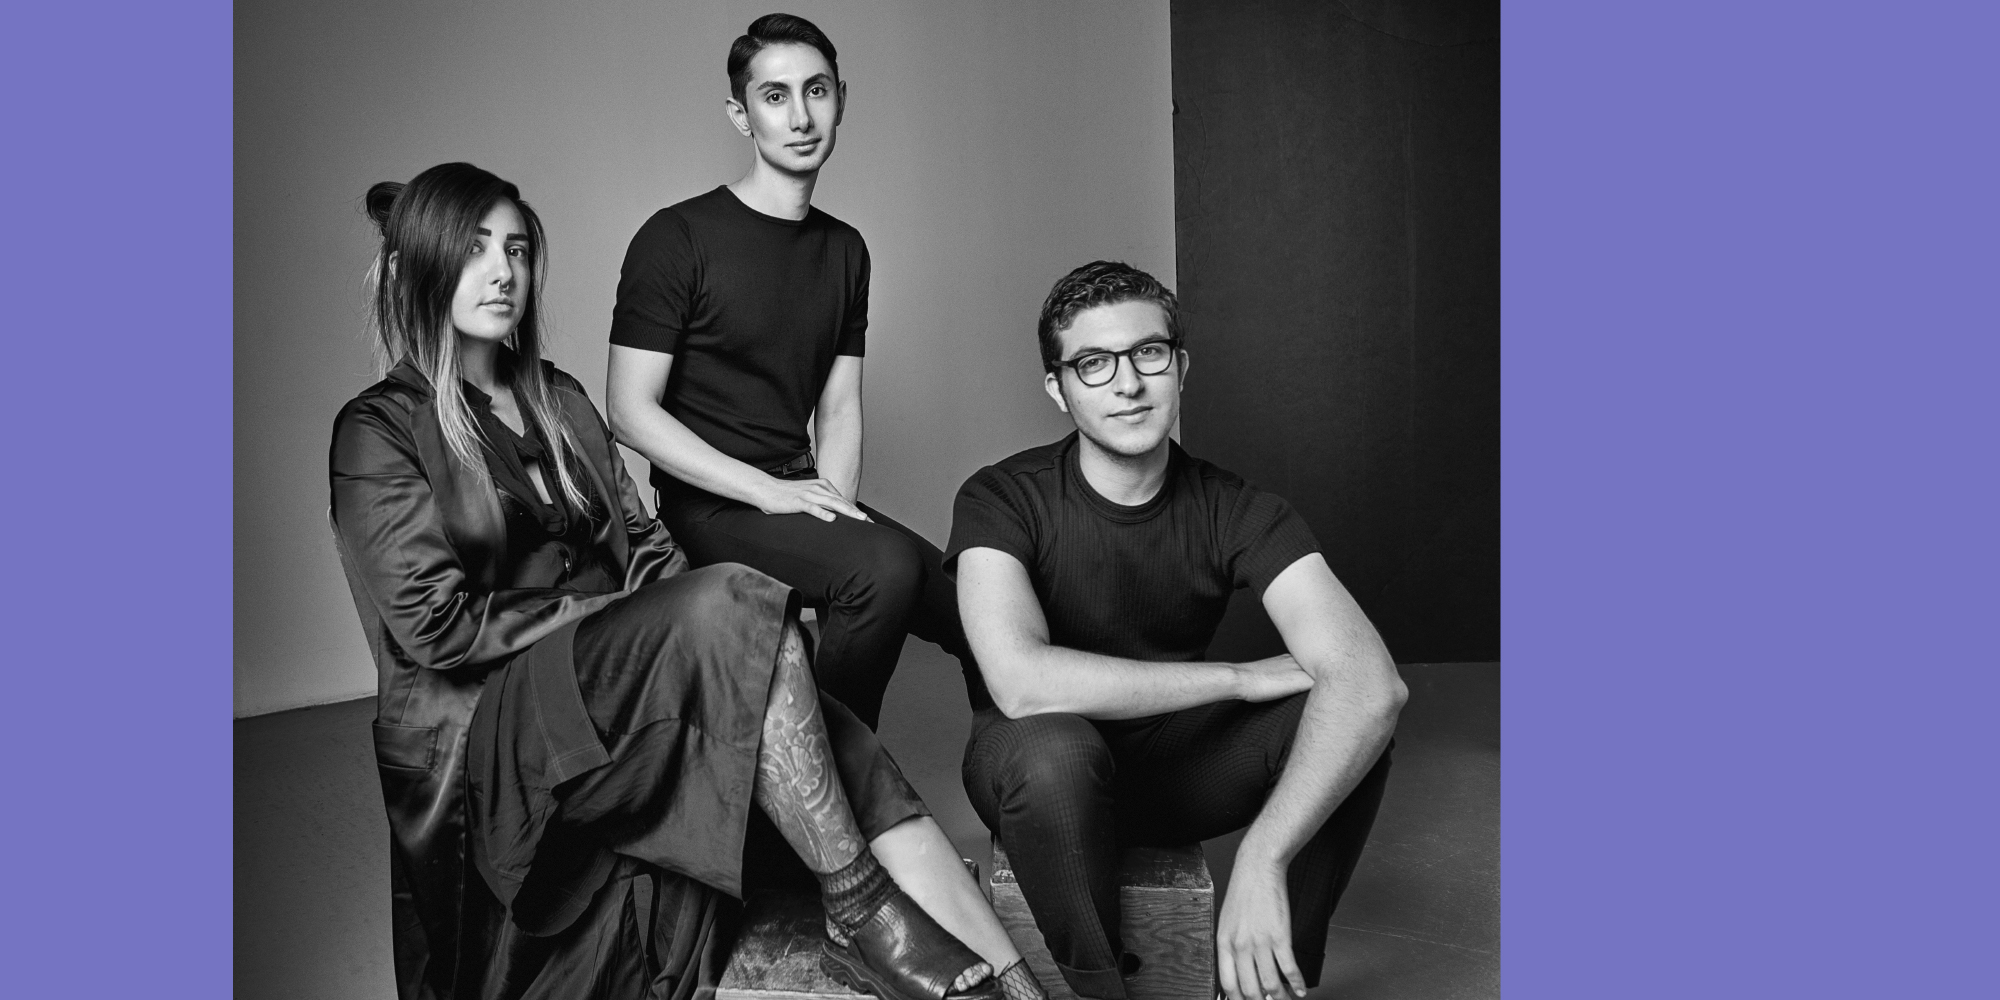 The Suzanne Rogers Fashion Institute Fellows: Olivia Rubens, Matin Mithras, and Jonah Solomon striking a pose after being announced as Fellows.